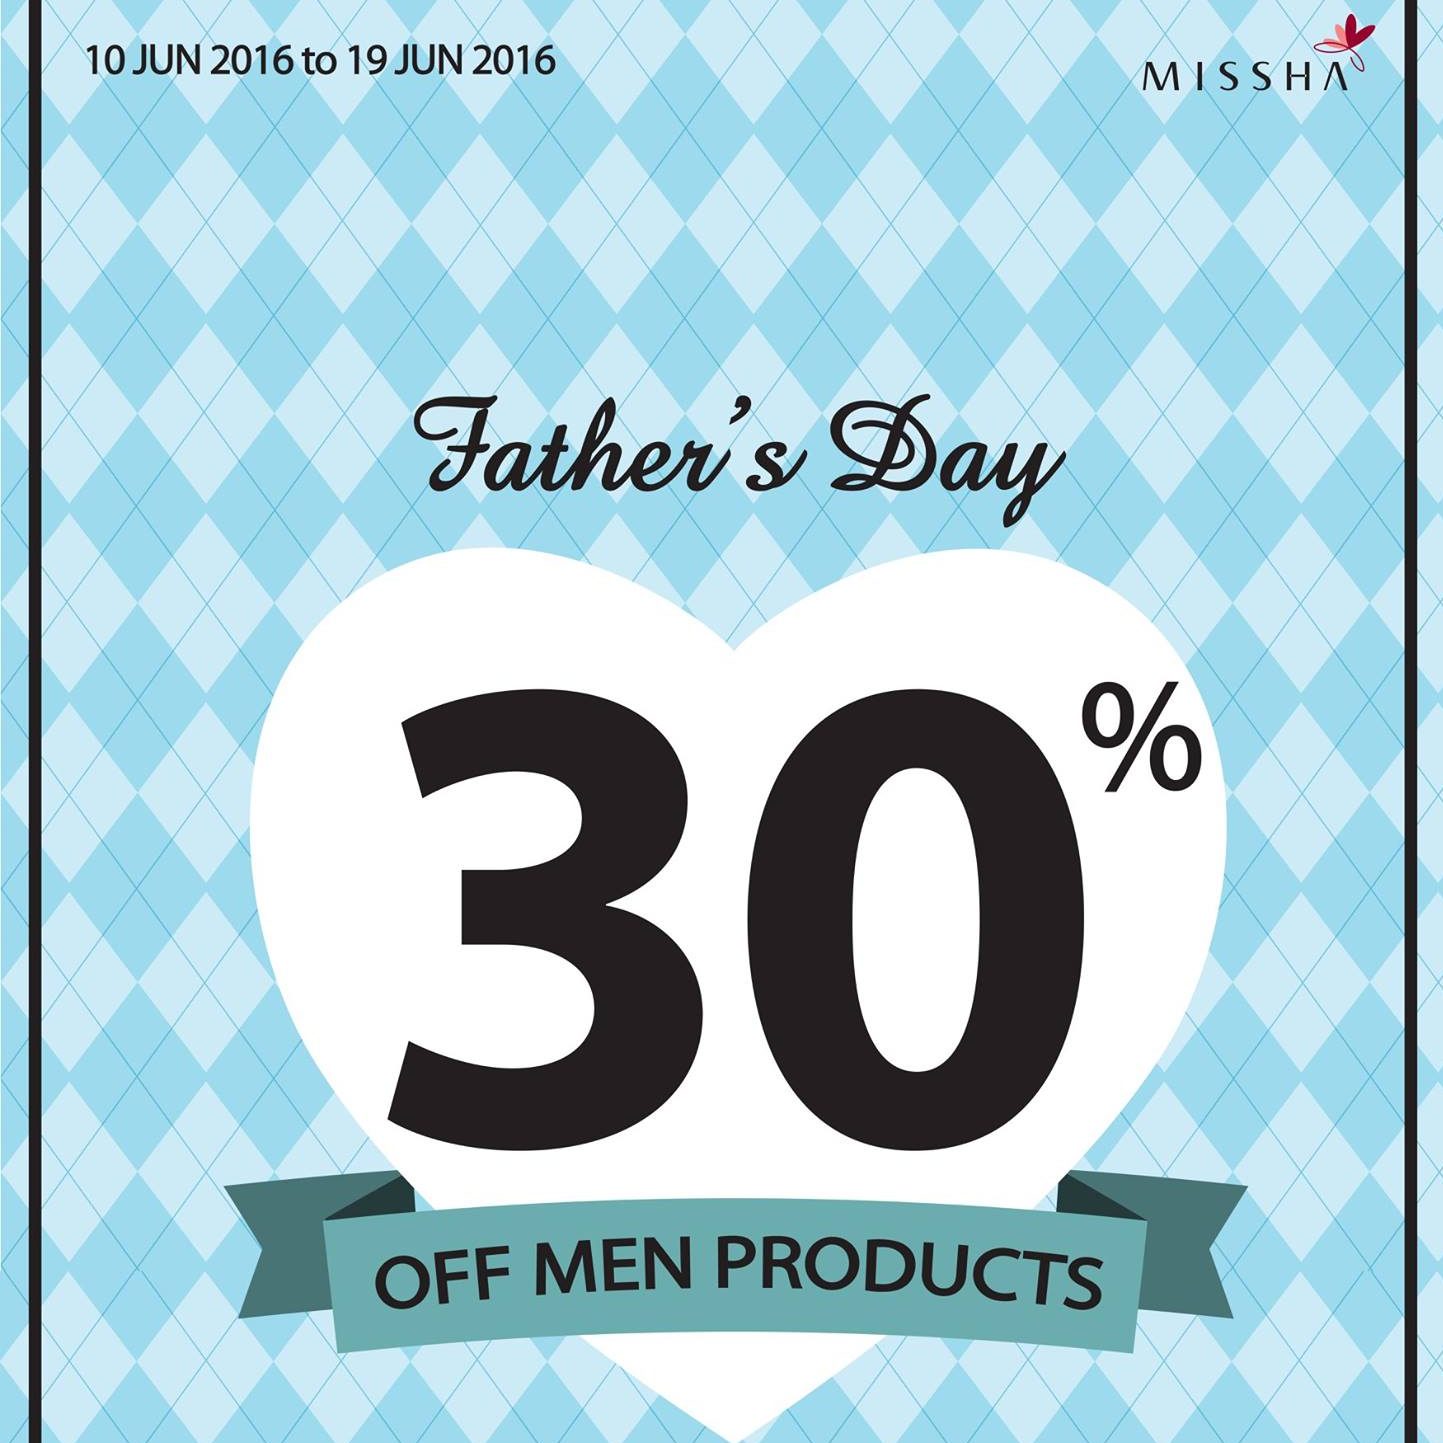 Missha SG Father’s Day 30% Off Men Products 10 to 19 Jun 2016